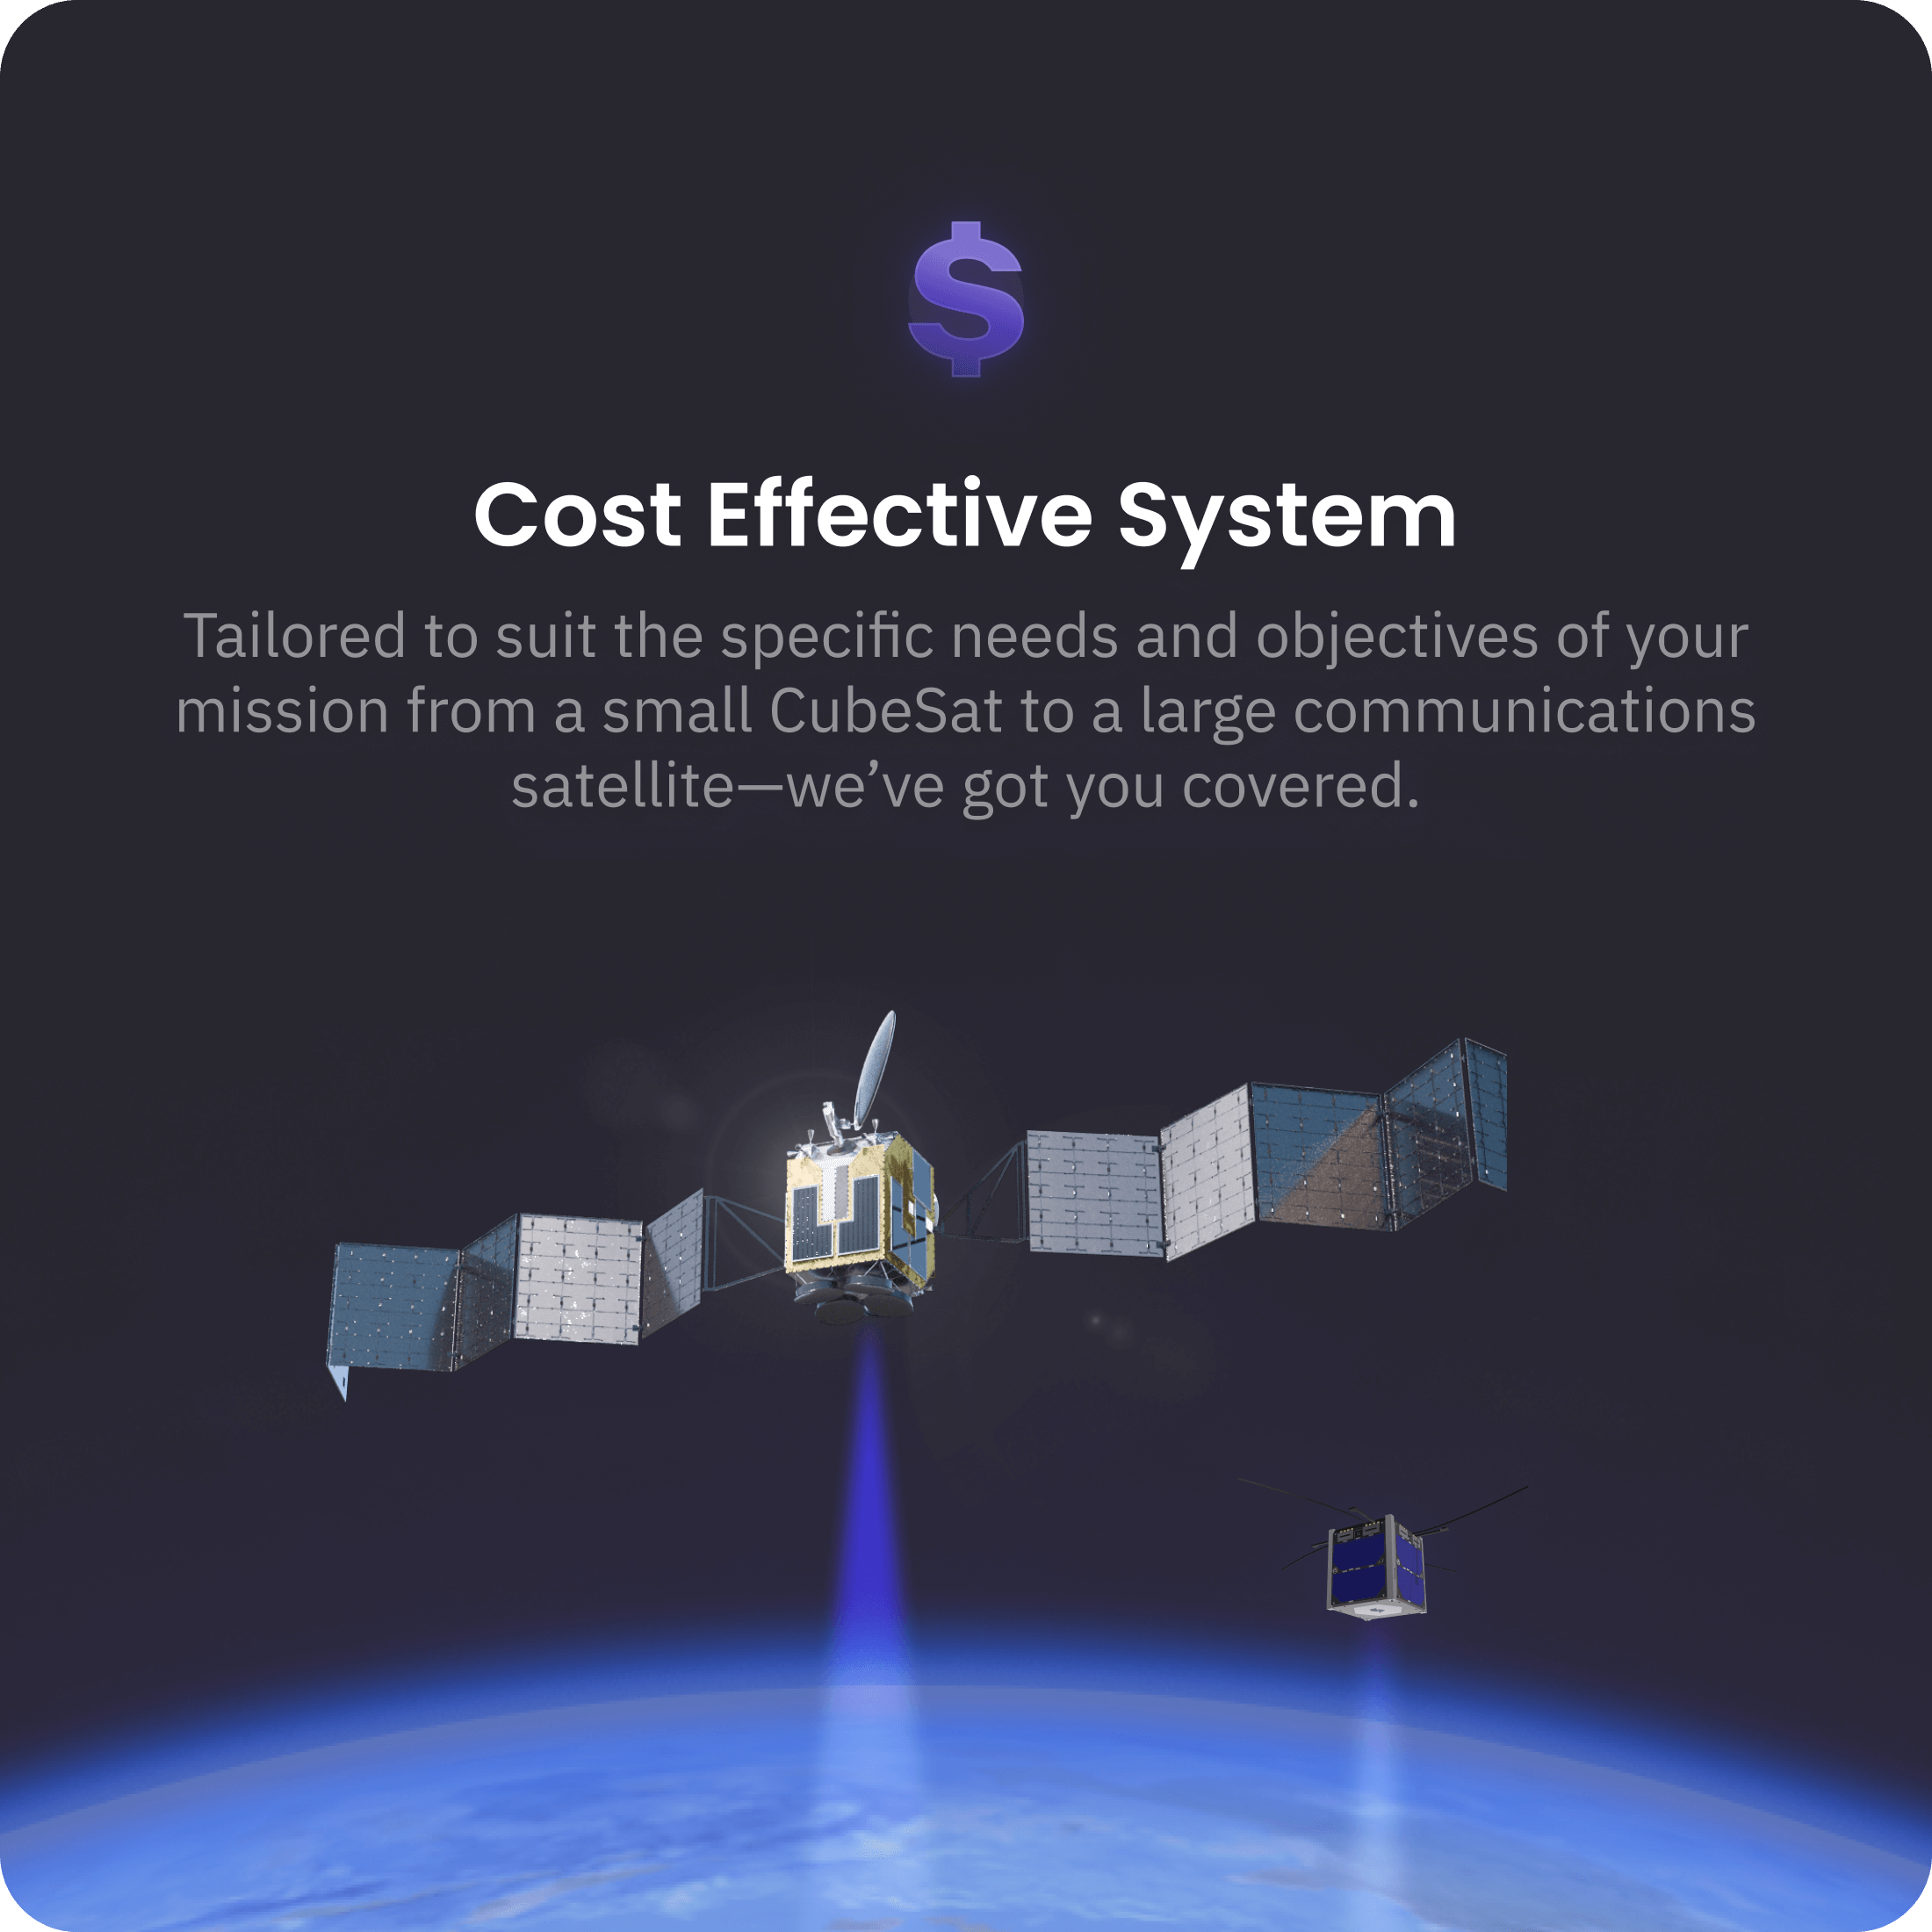 Cost effective system - Tailored to suit the specific needs and objectives of your mission from a small CubeSat to a large communications satellite, we've got you covered.